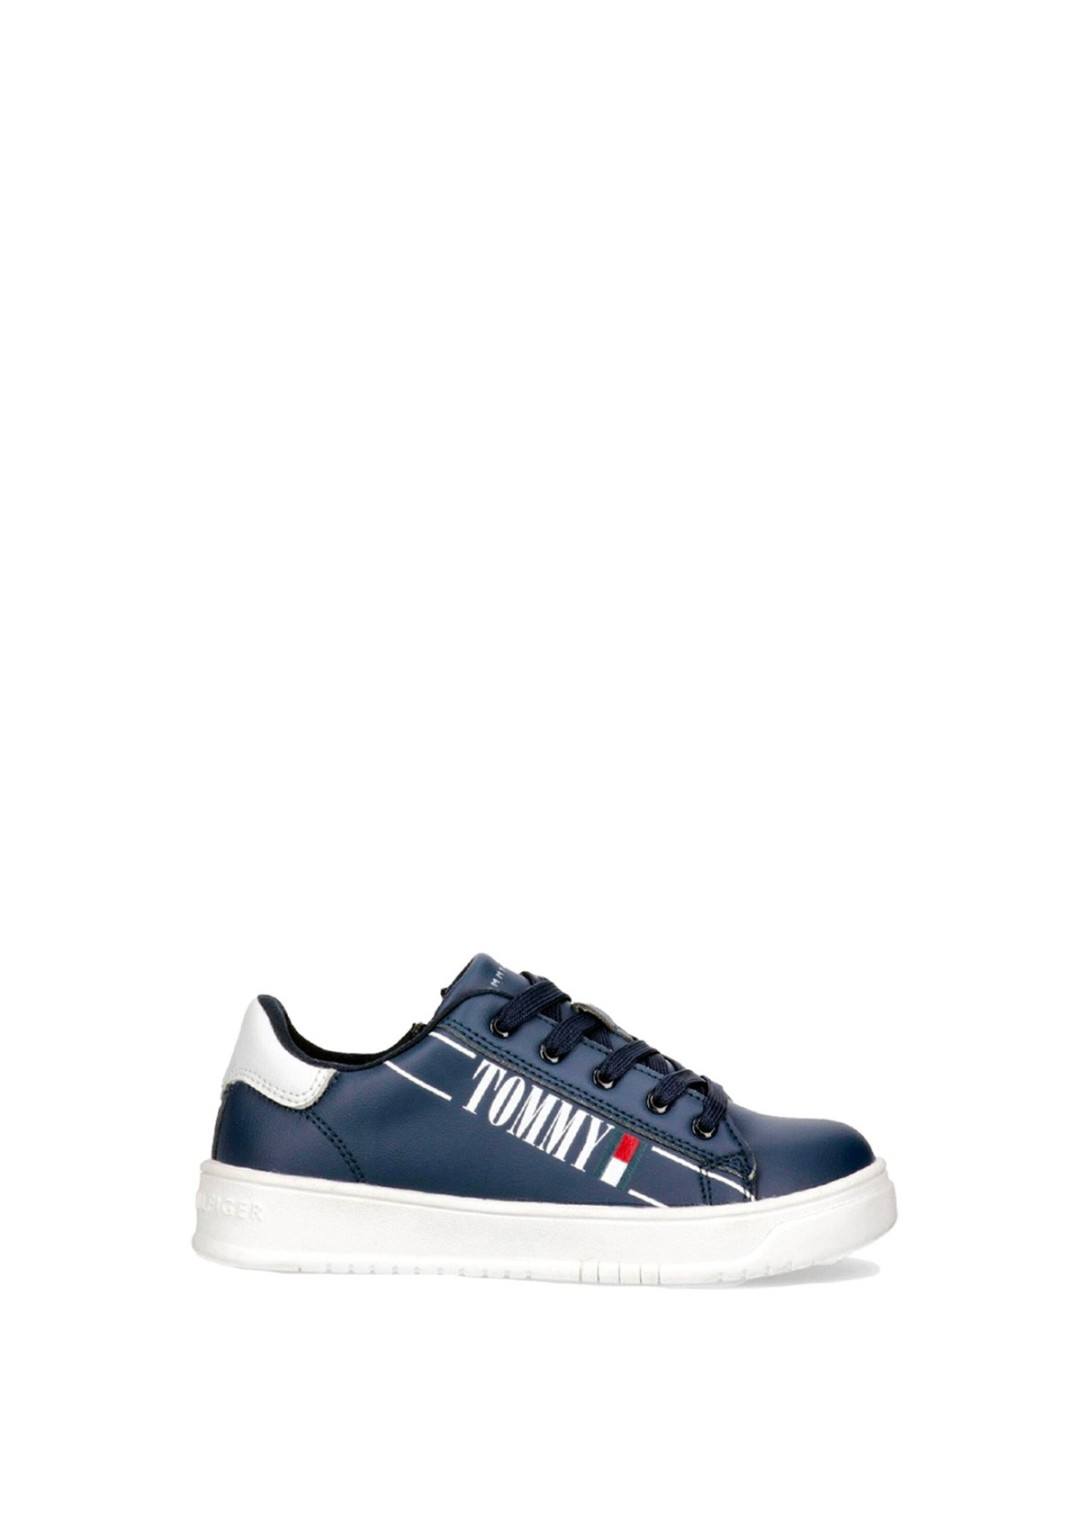 TOMMY HILFIGER Sneakers Bambino